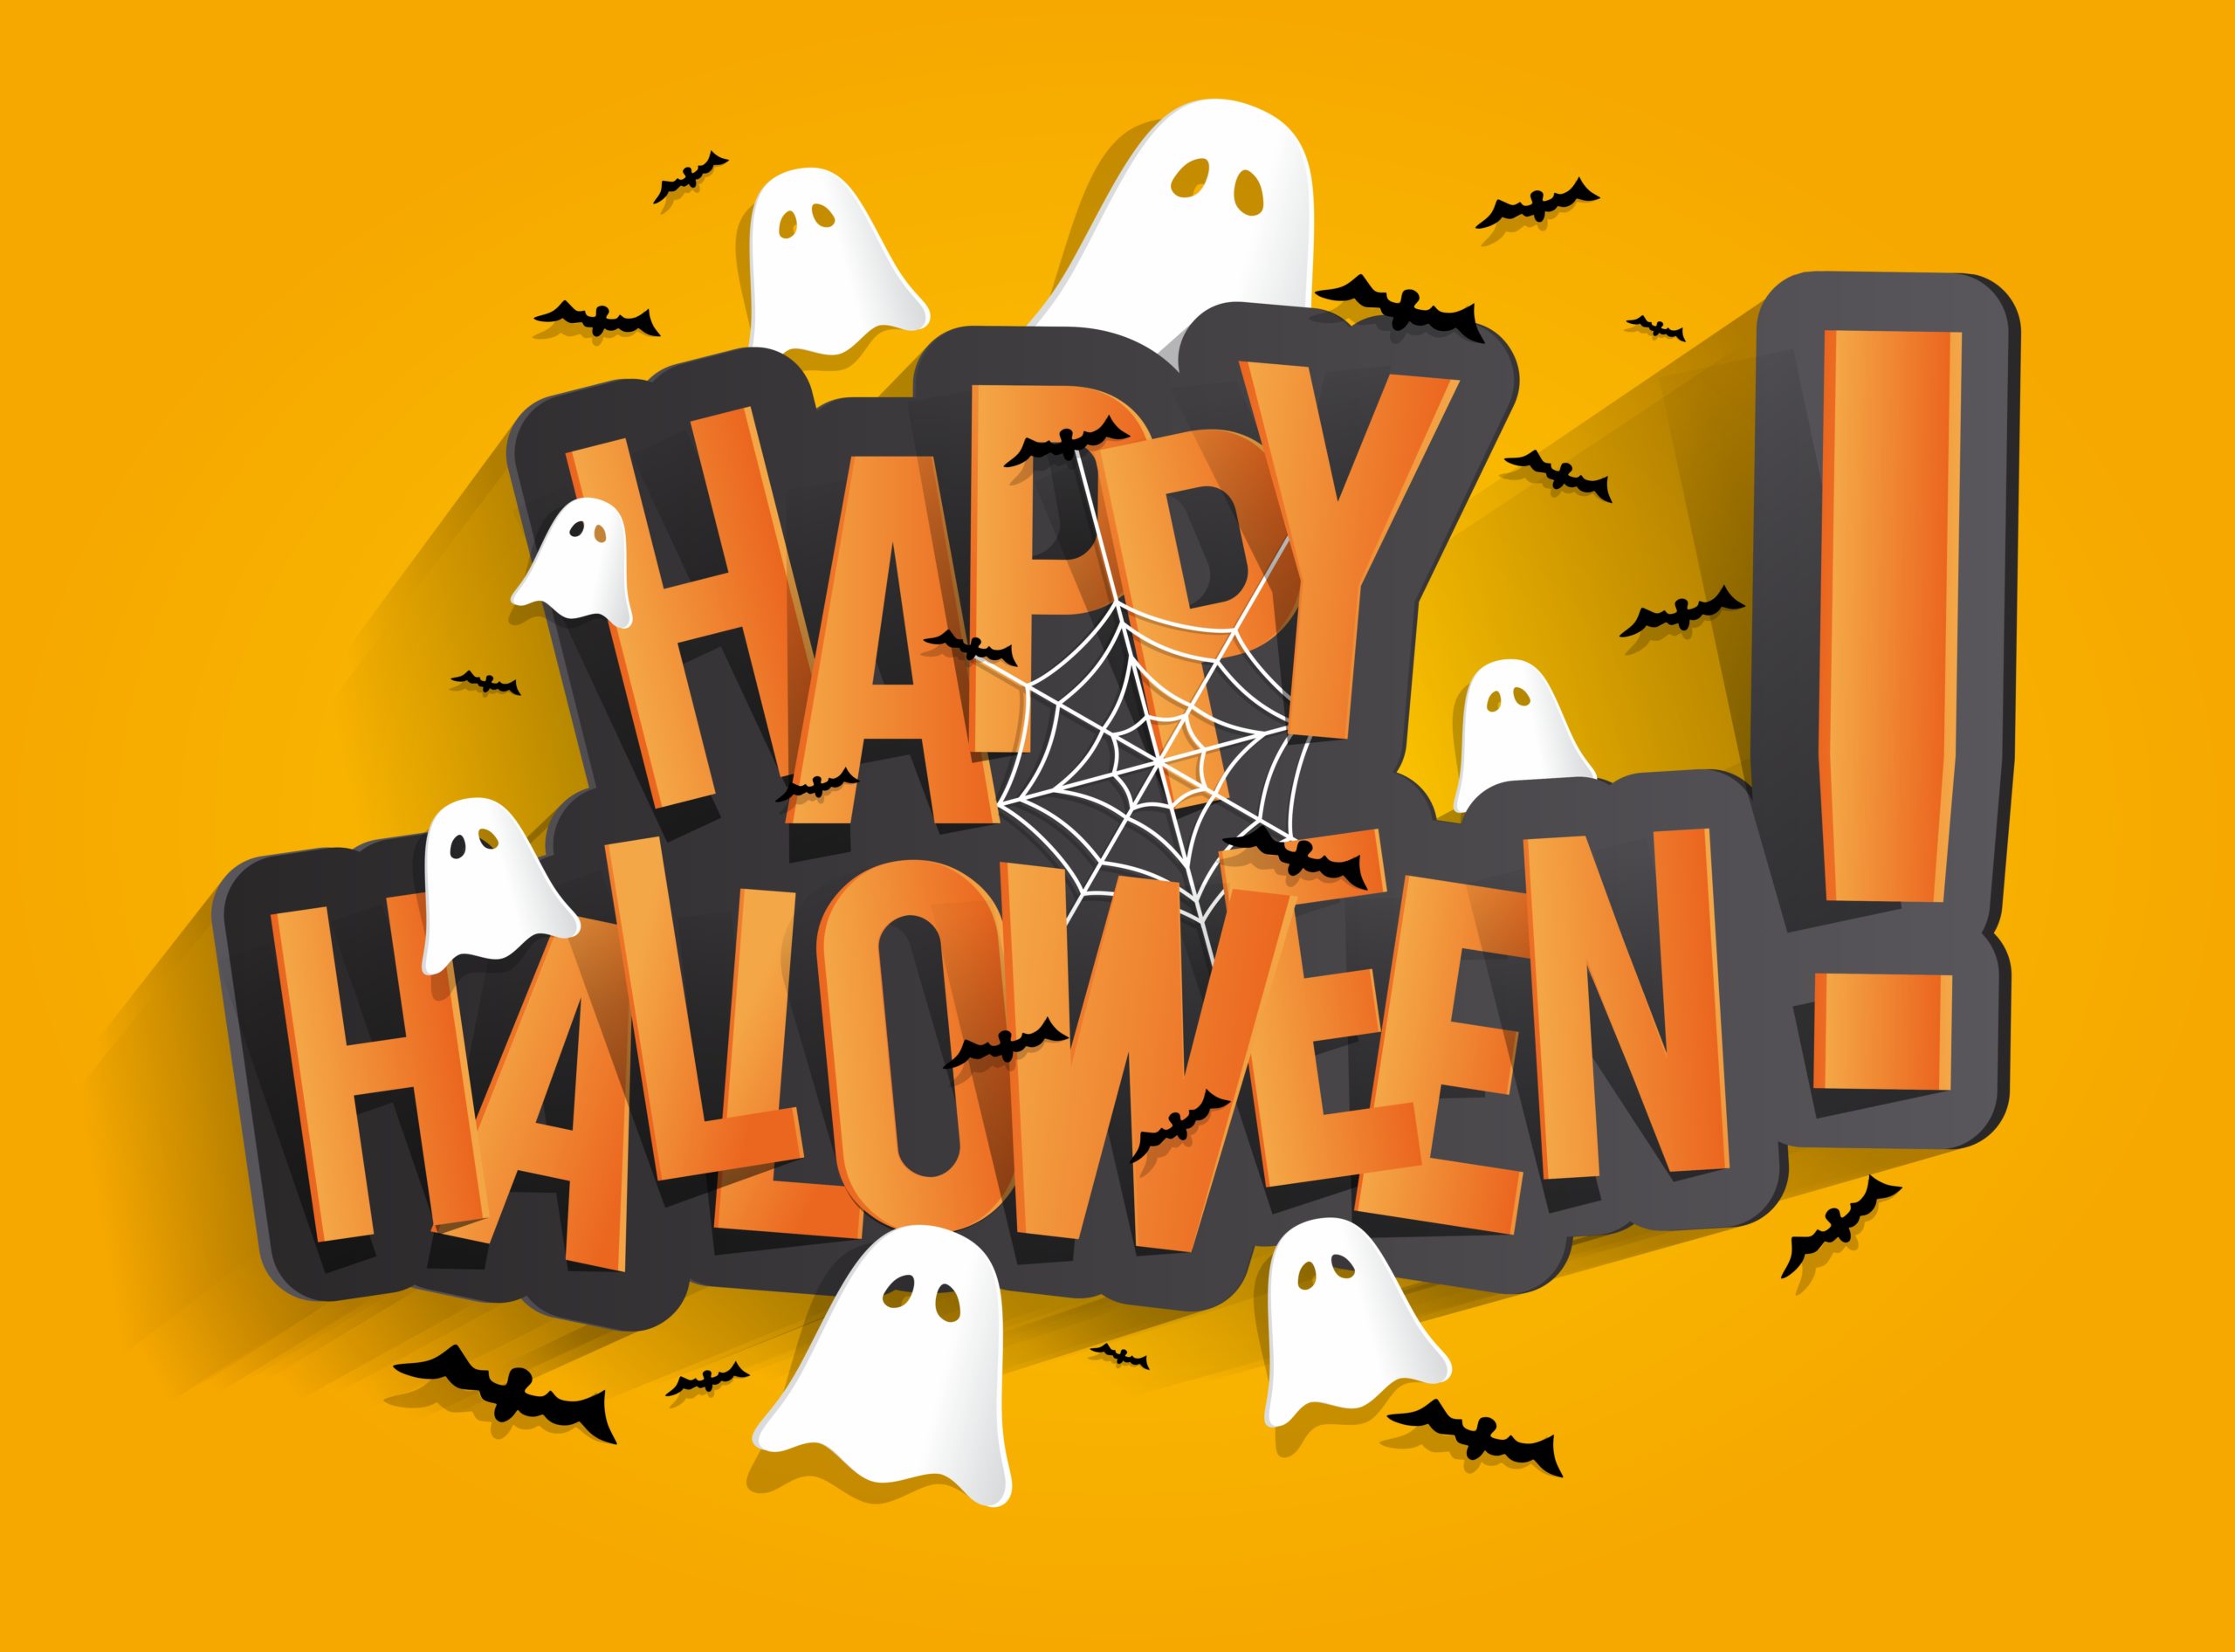 Halloween 2021 Wishes, Greetings, Quotes, Messages, HD Images, and Stickers for Friends and Family